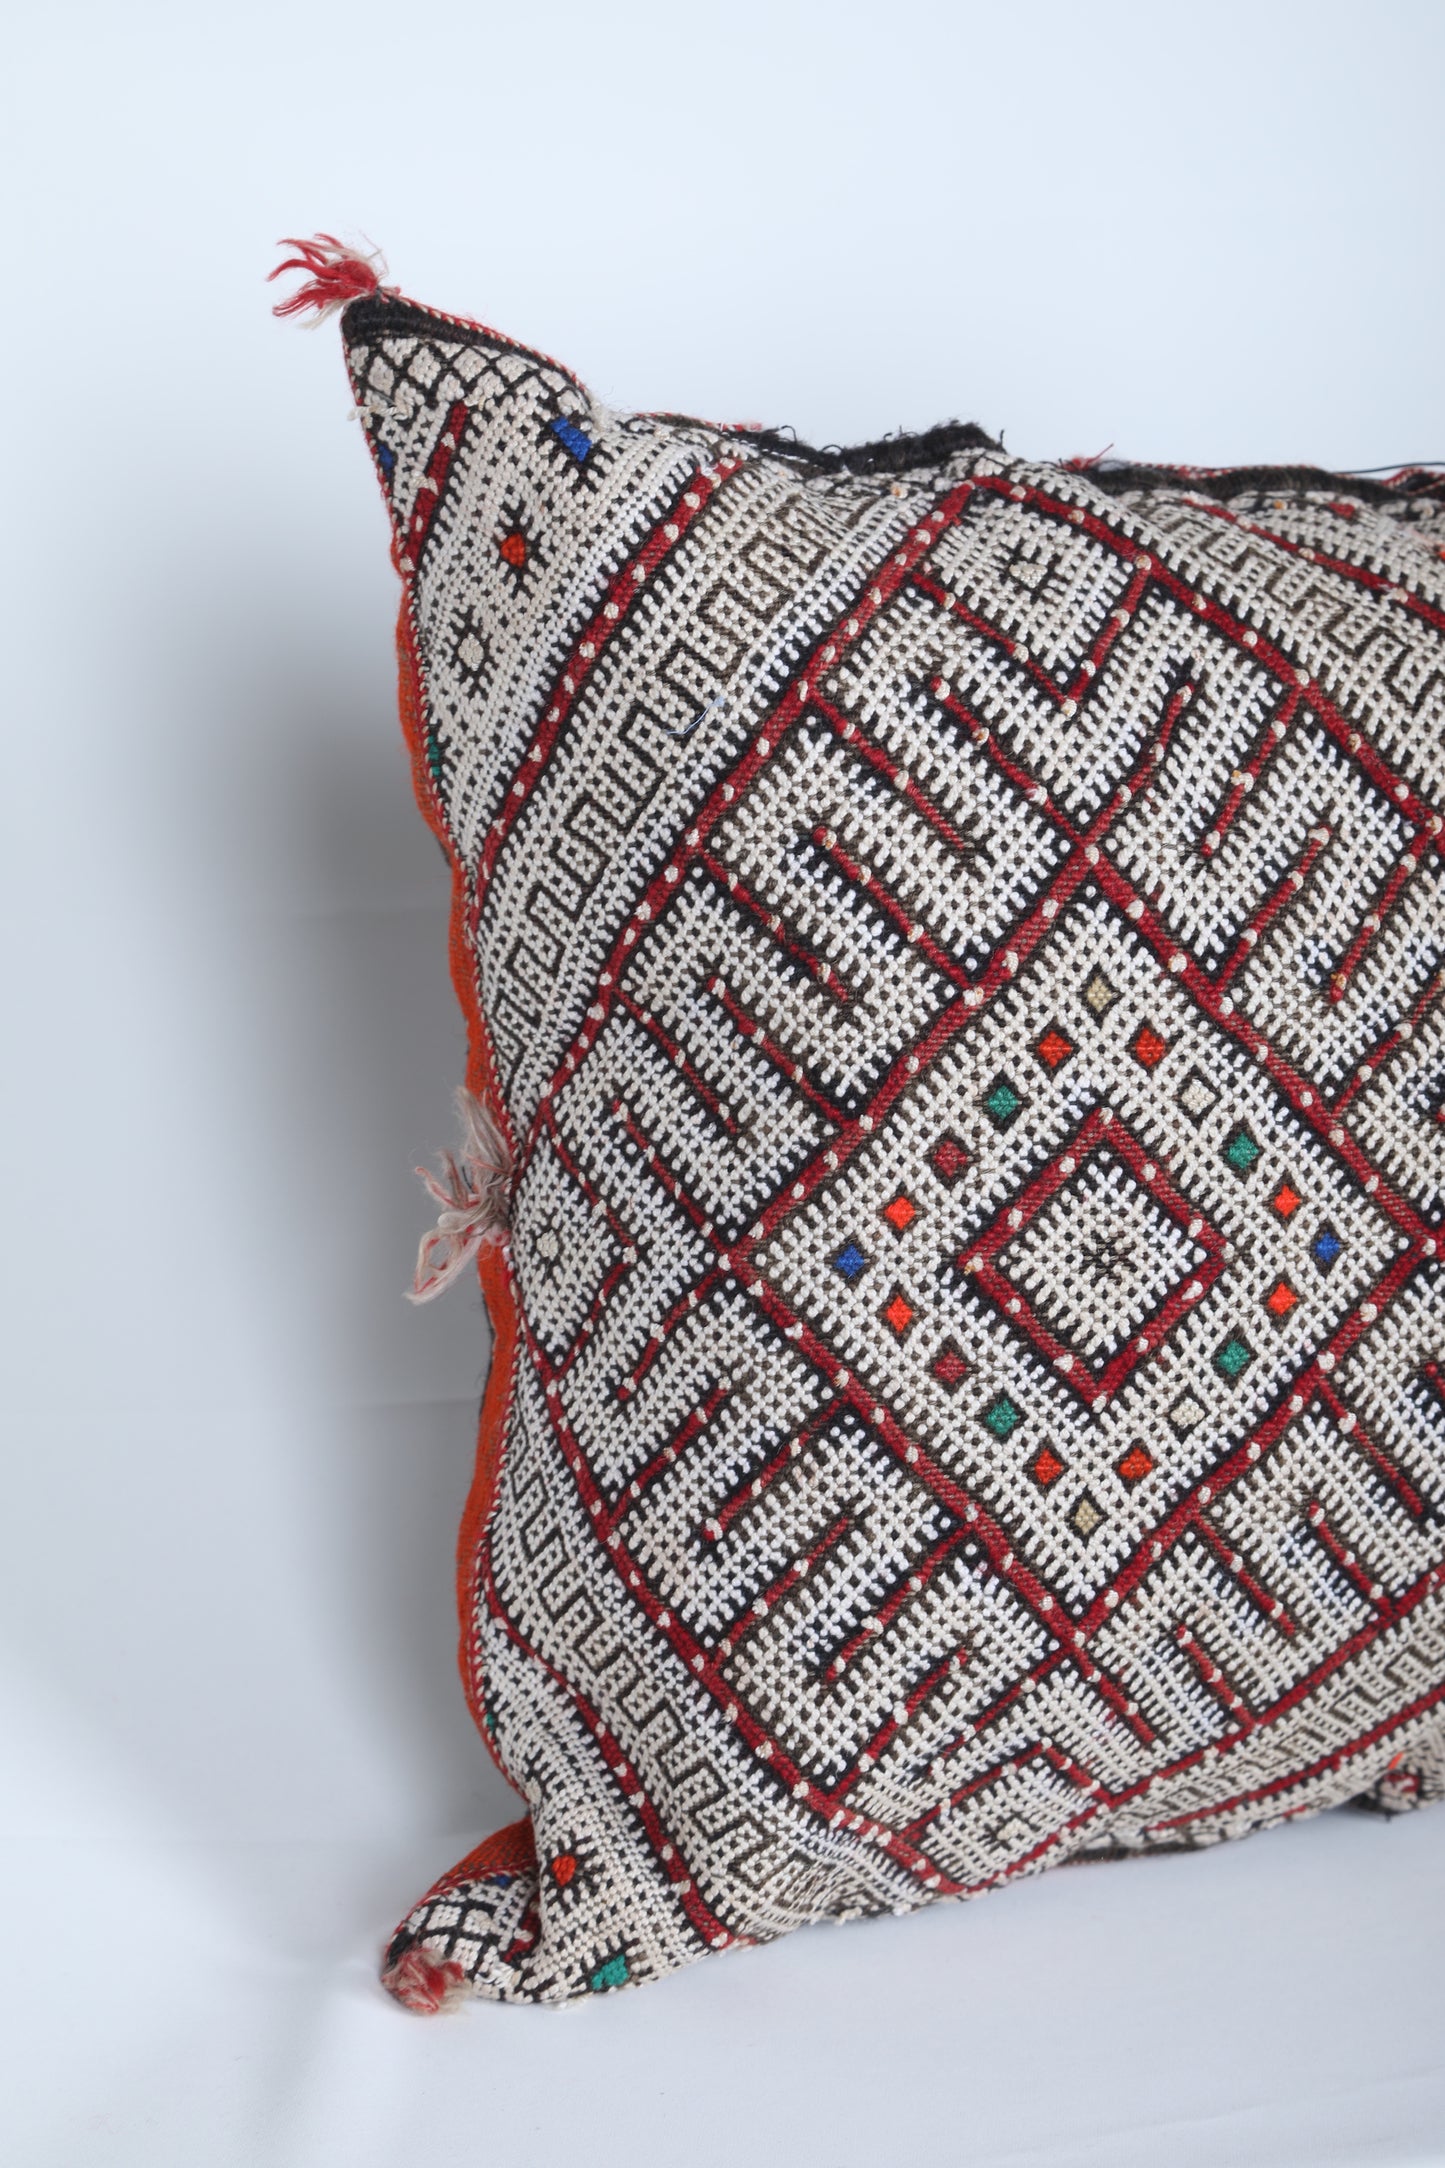 Moroccan Pillow 17.3 INCHES X 18.5 INCHES